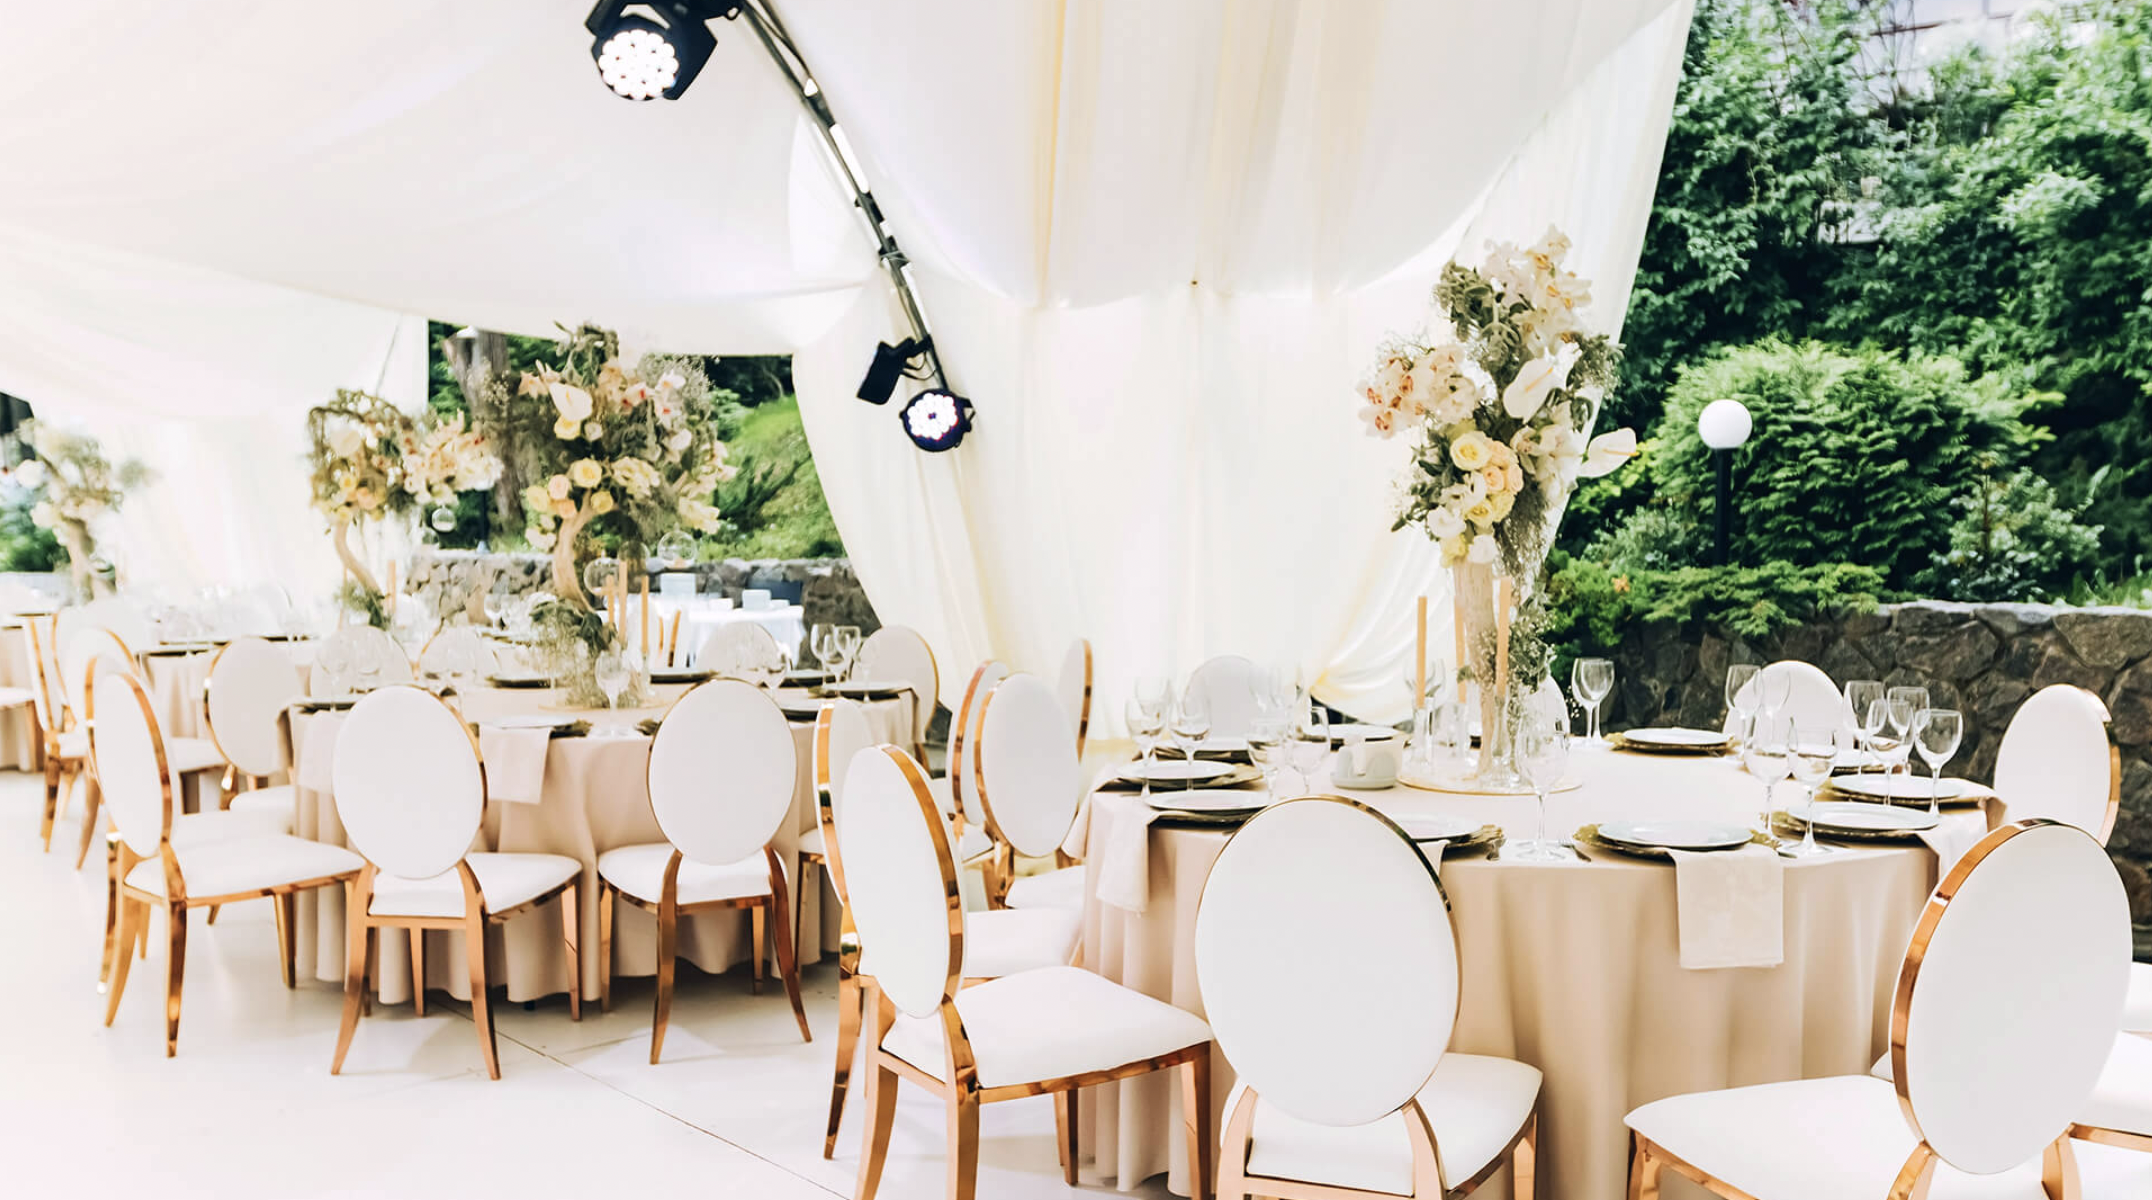 How to Make An Event Venue Everyone Will Love